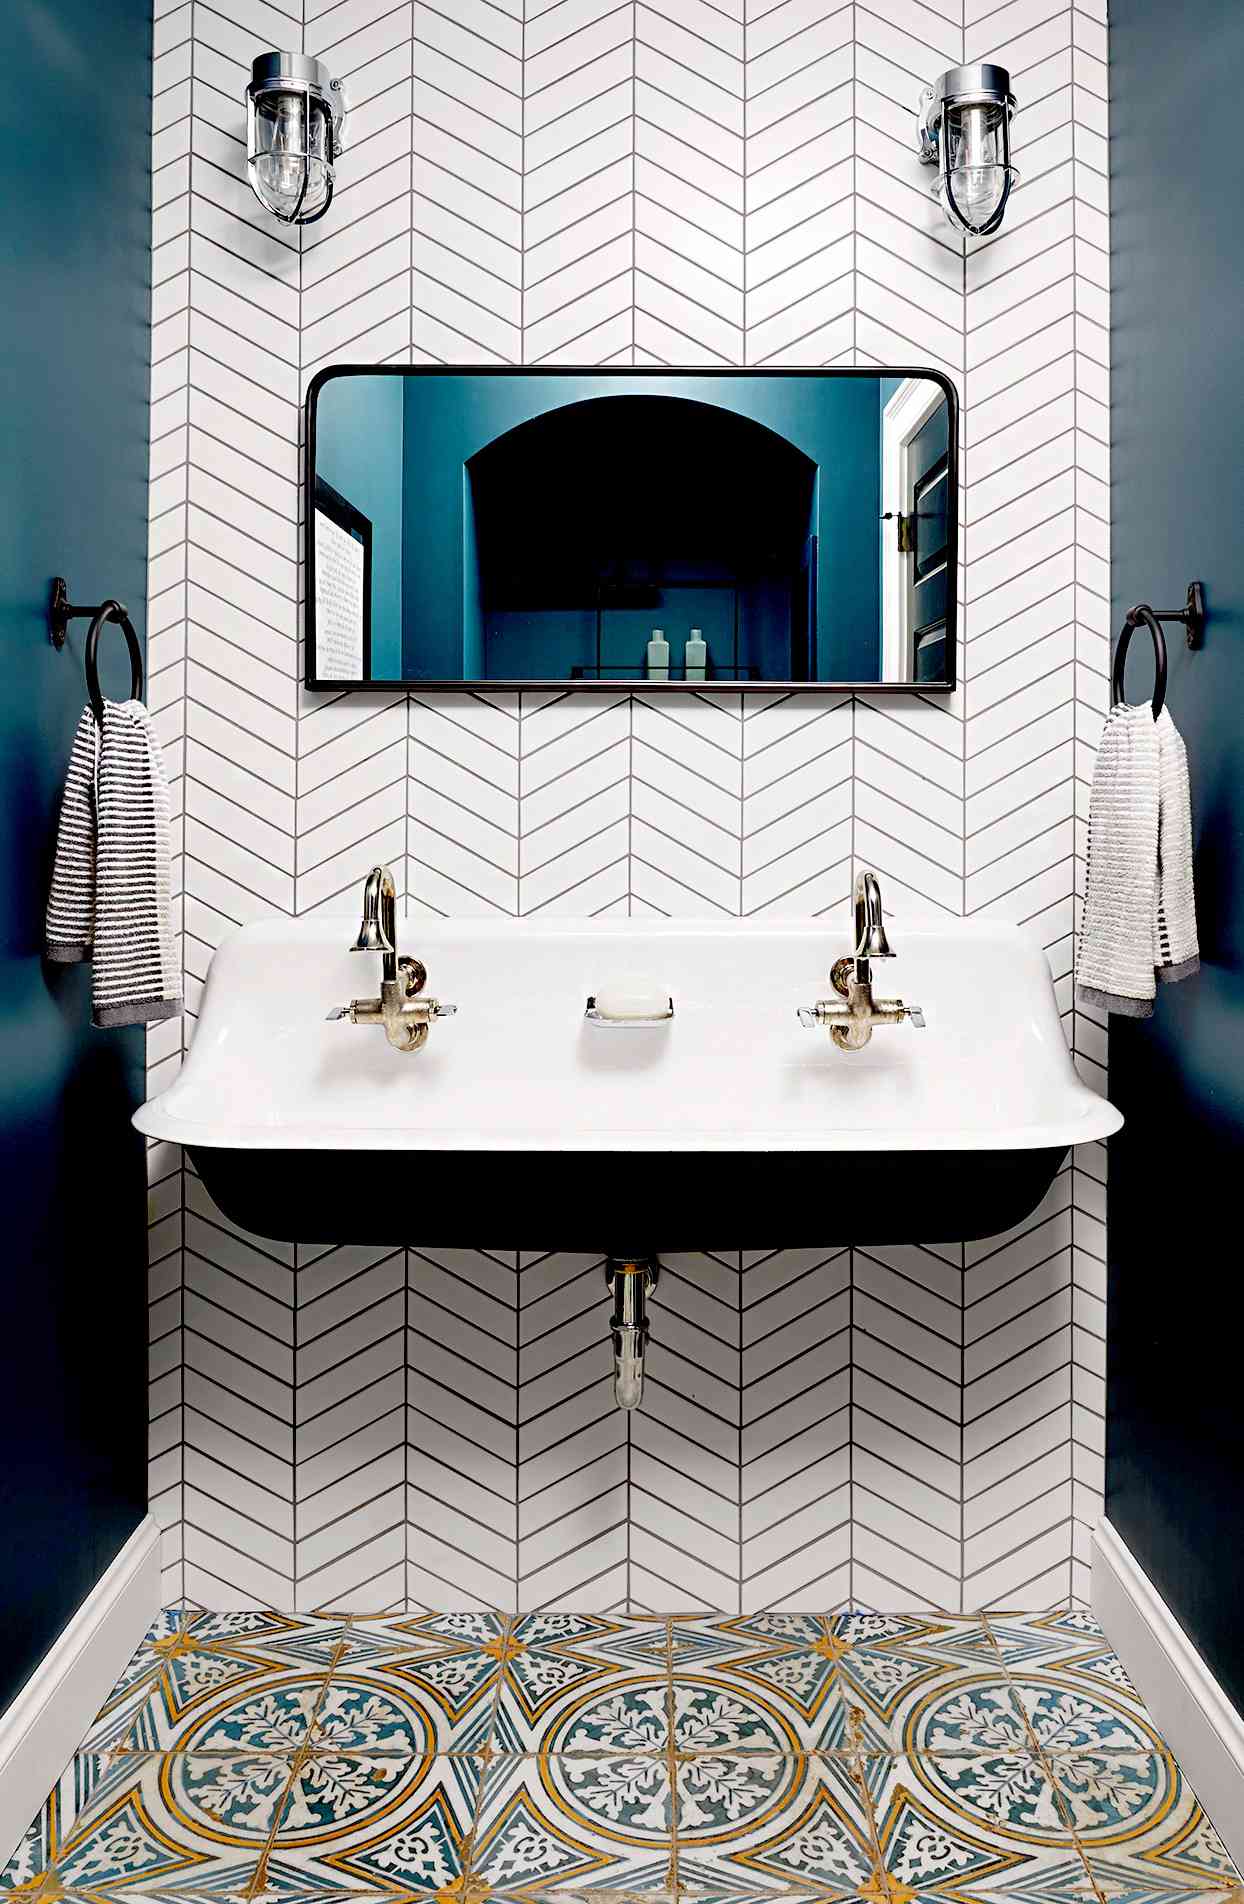 Double sink with geometric wallpaper